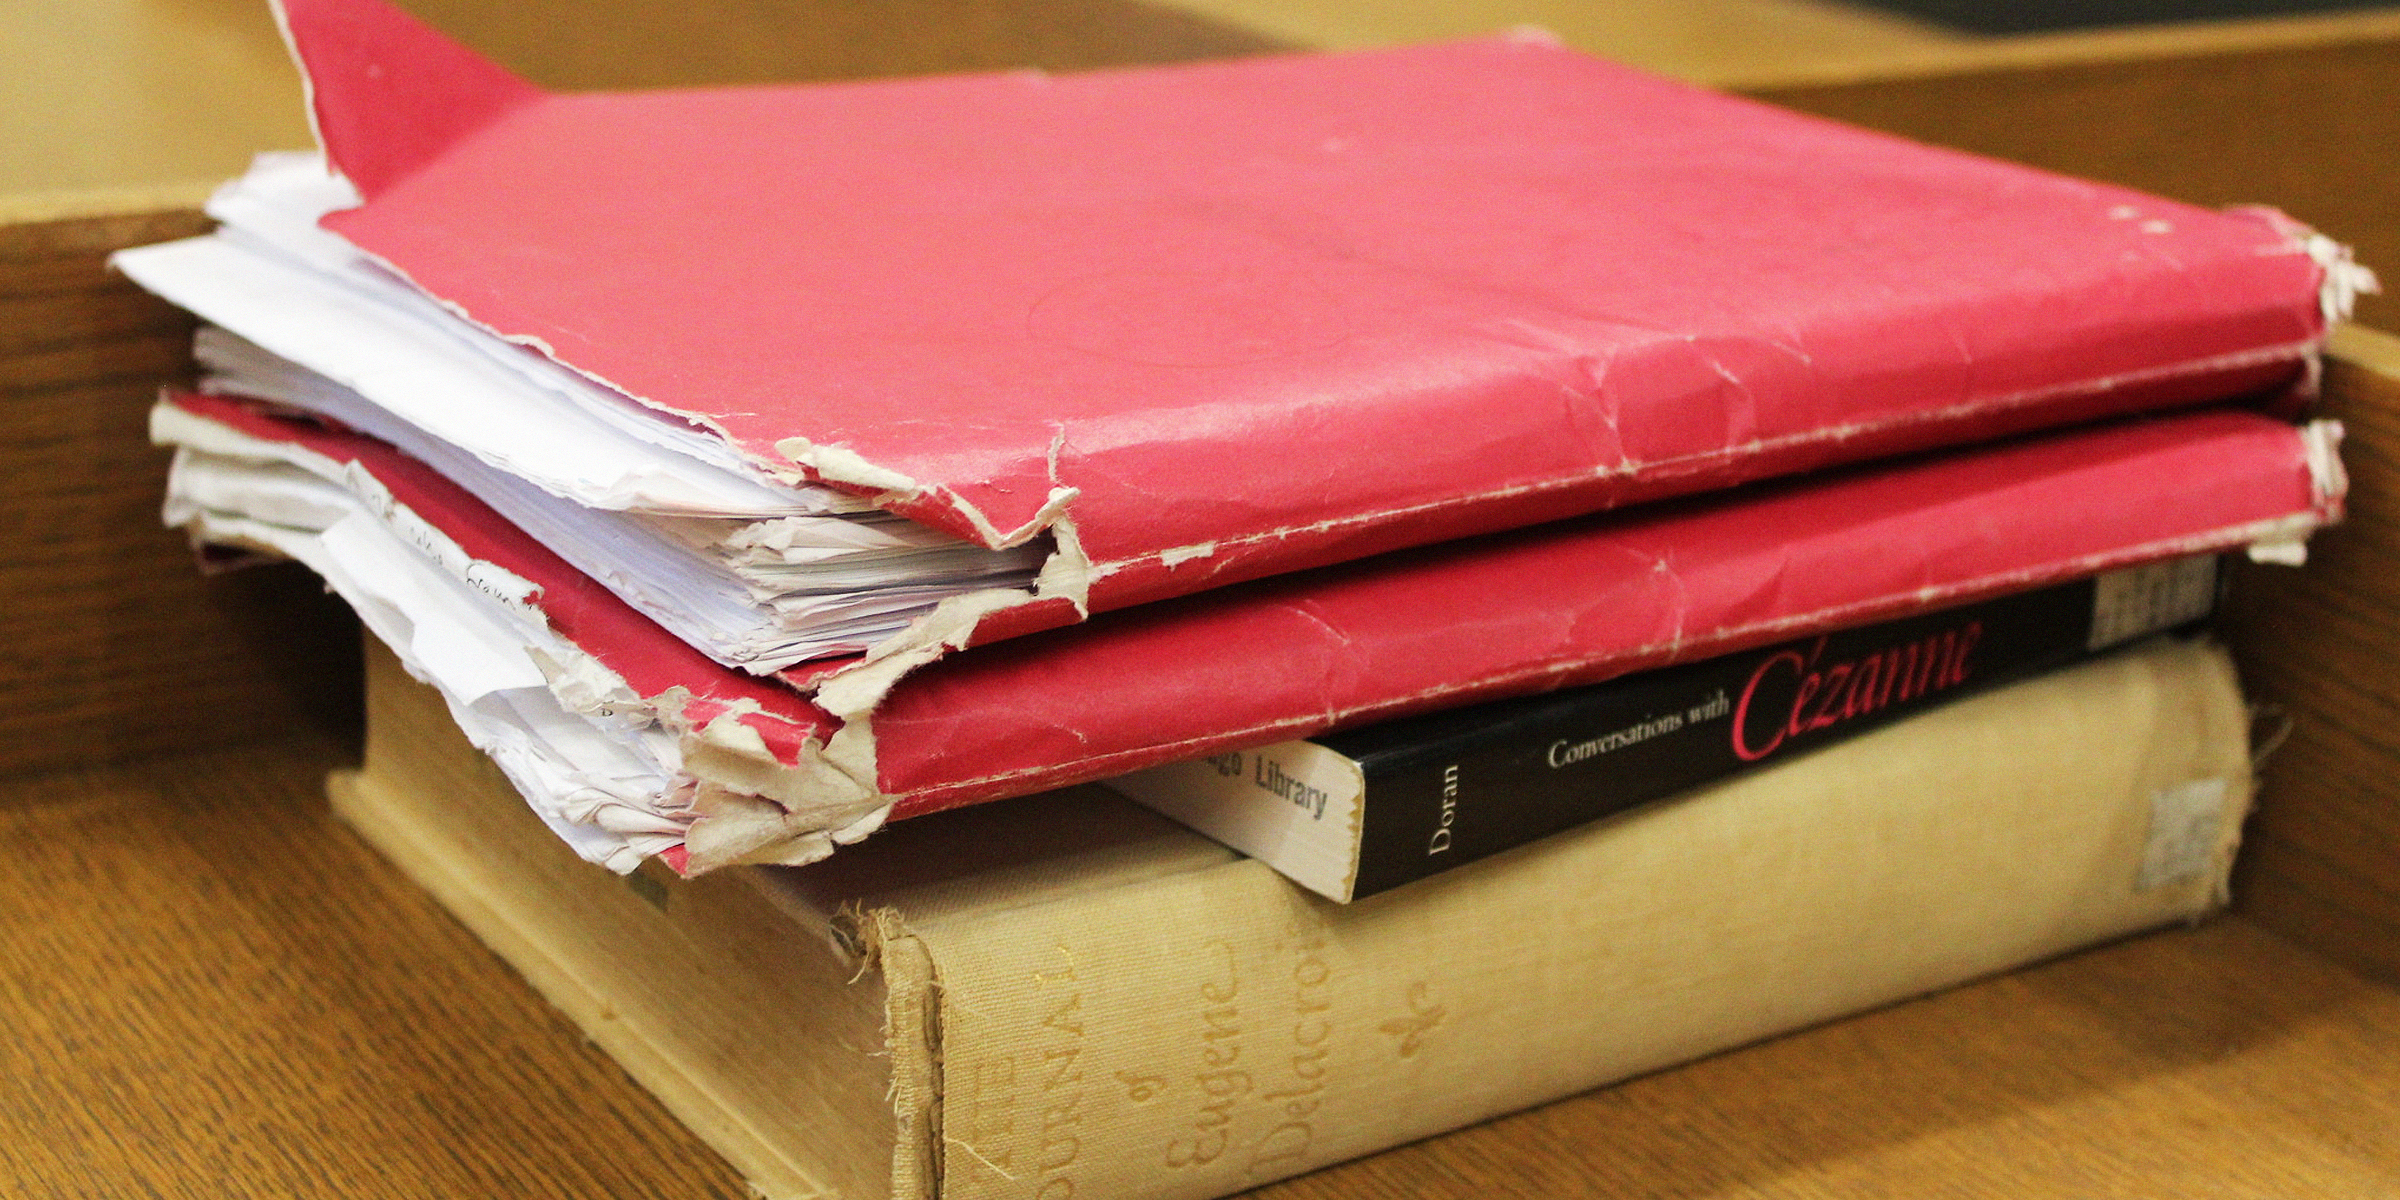 Old files left on table | Source: Flickr